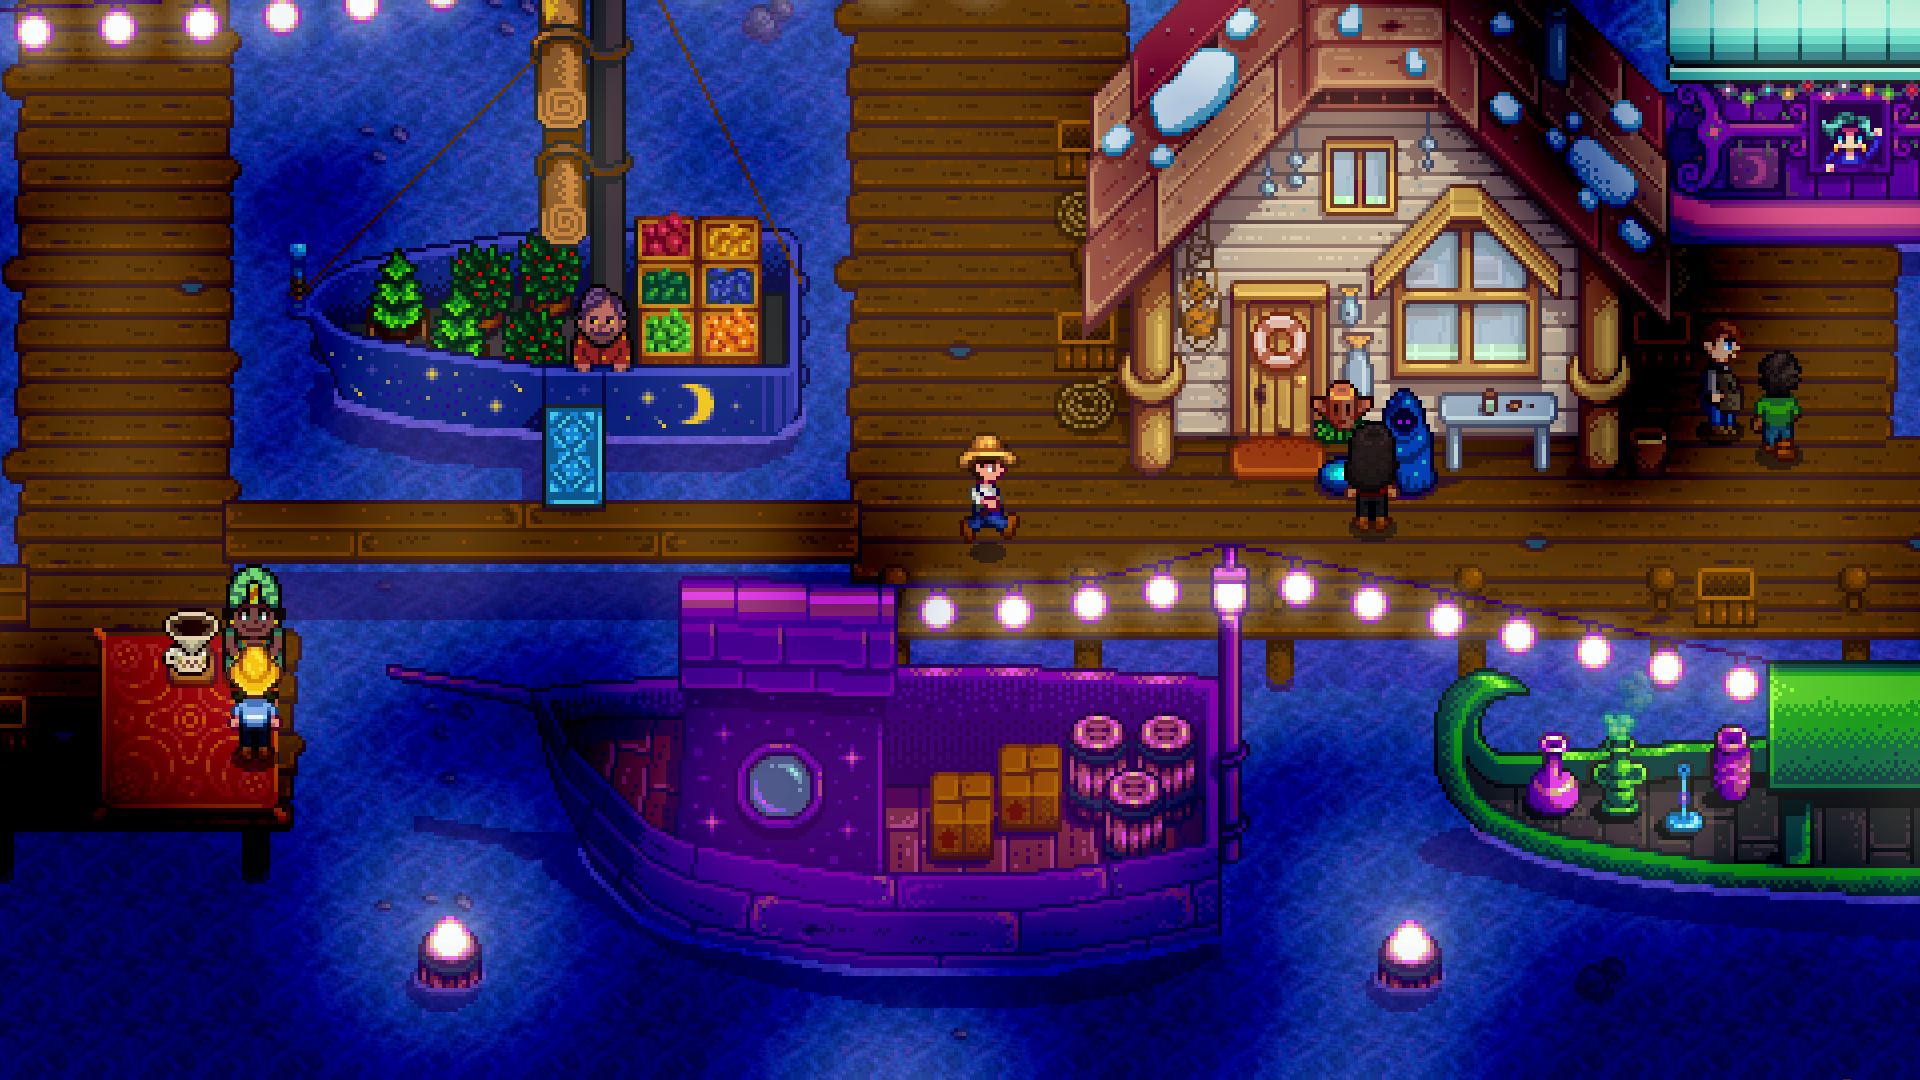 Not all chores, Stardew Valley also offers a yearly night market. Credit: ConcernedApe